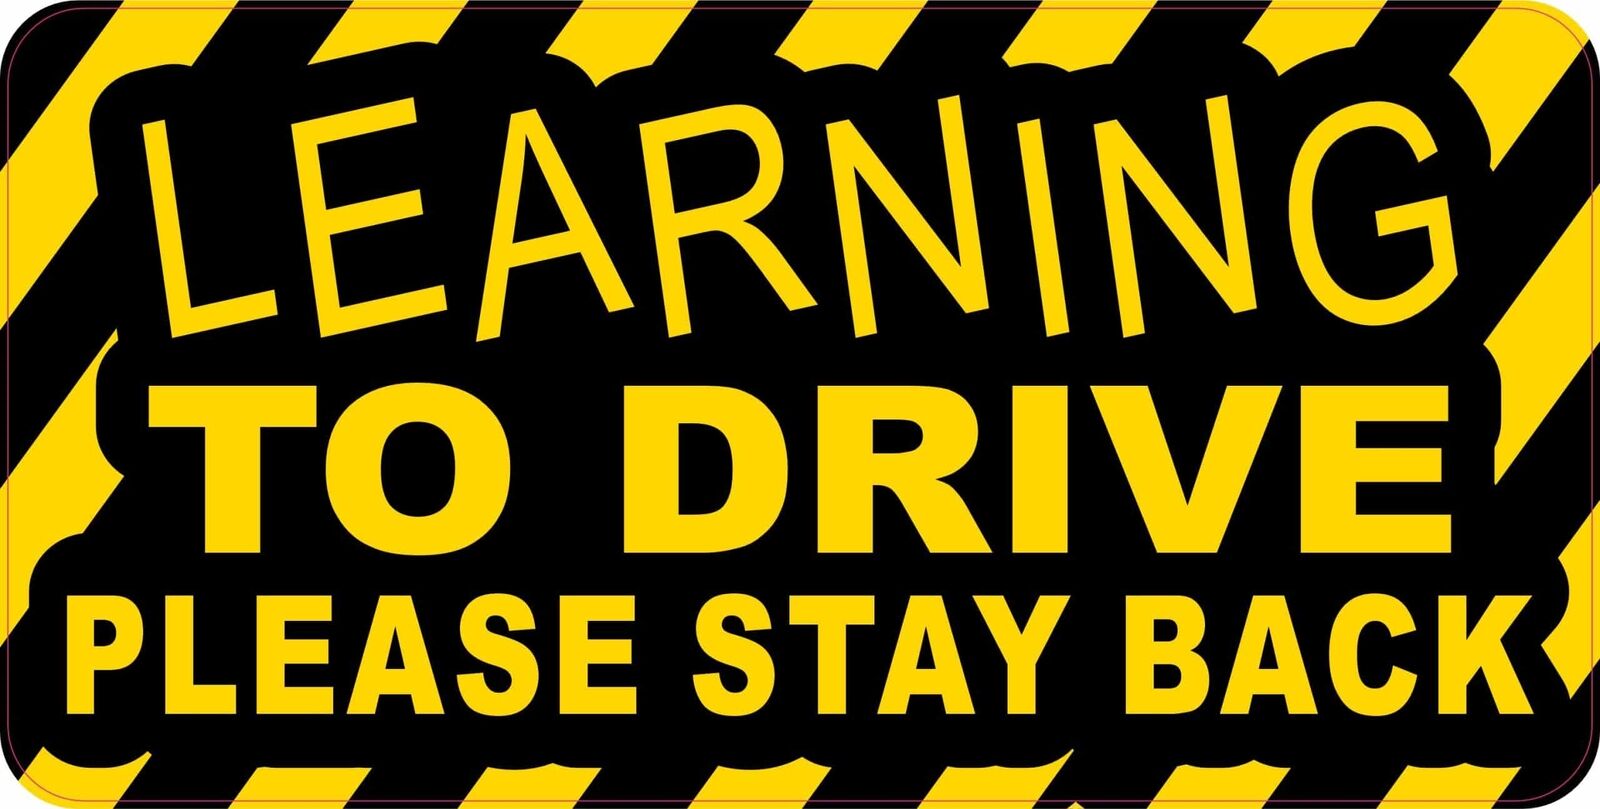 StickerTalk Learning To Drive Please Stay Back Magnet, 10 inches x 5 inches